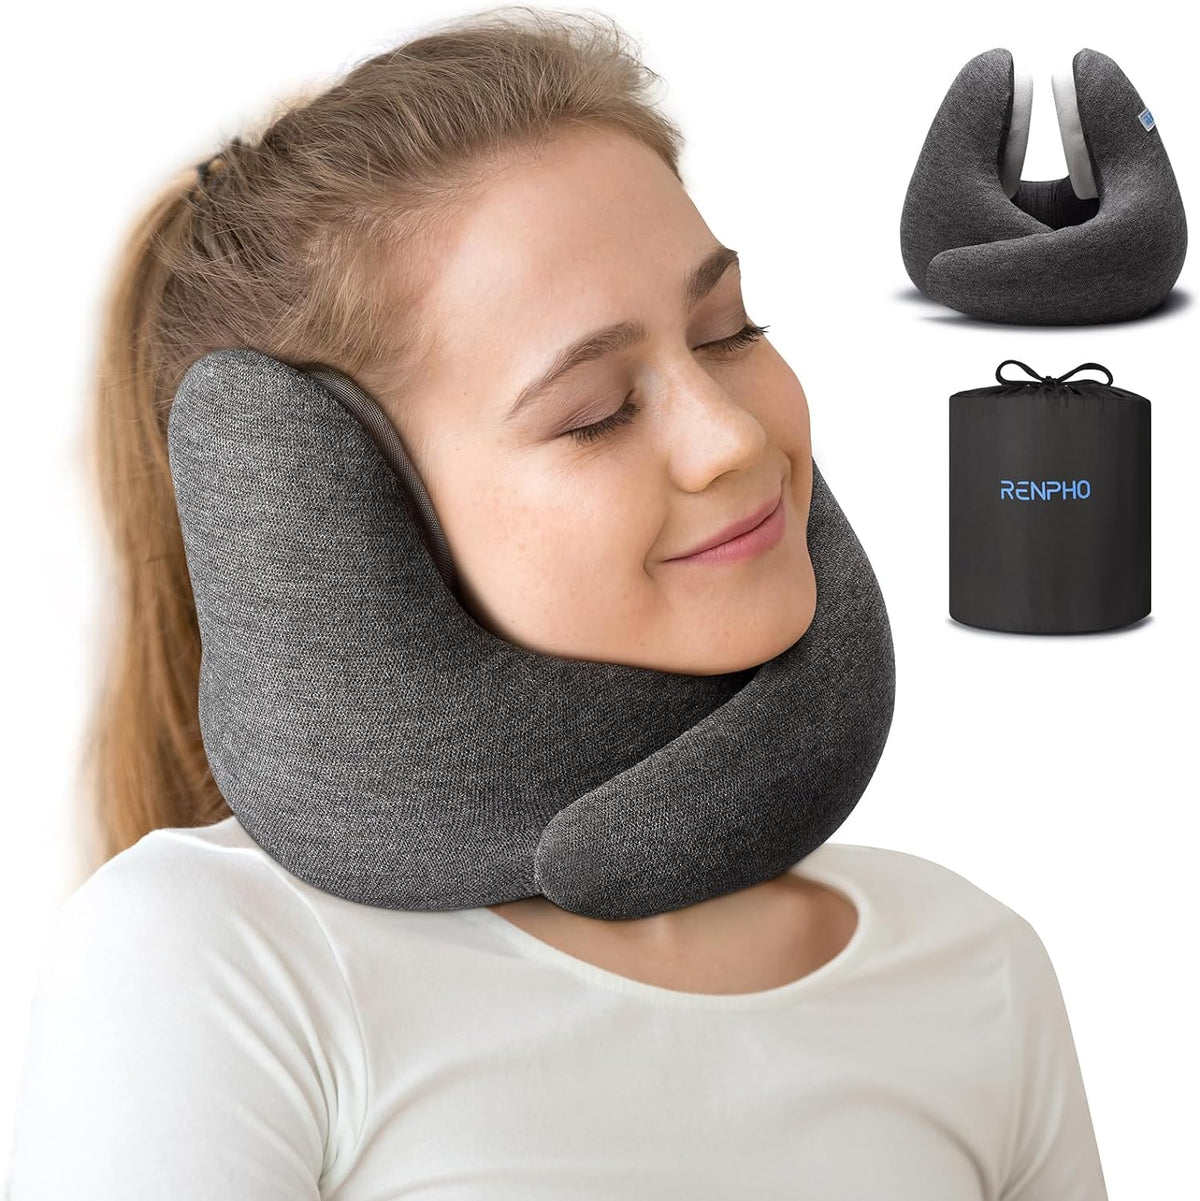 A woman with her eyes closed enjoys using a gray memory foam Renpho EU neck pillow. Inset images show the Renpho neck pillow alone and a carrying case with brand logo "renpho" on it.